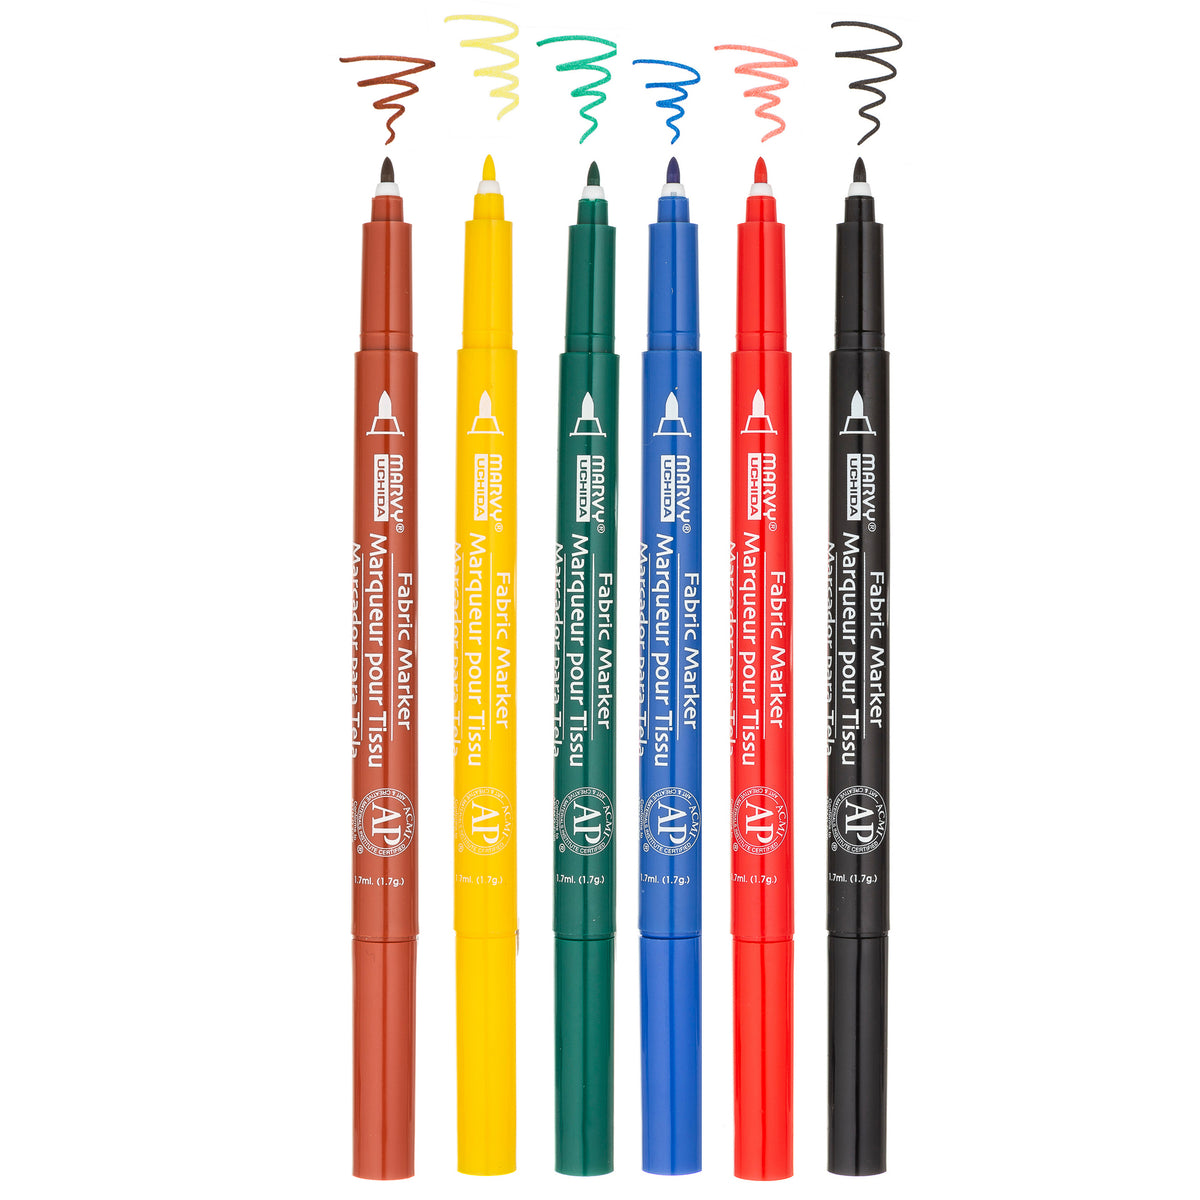 Fabric Marking PENS & PENCILS - Which are BEST? 